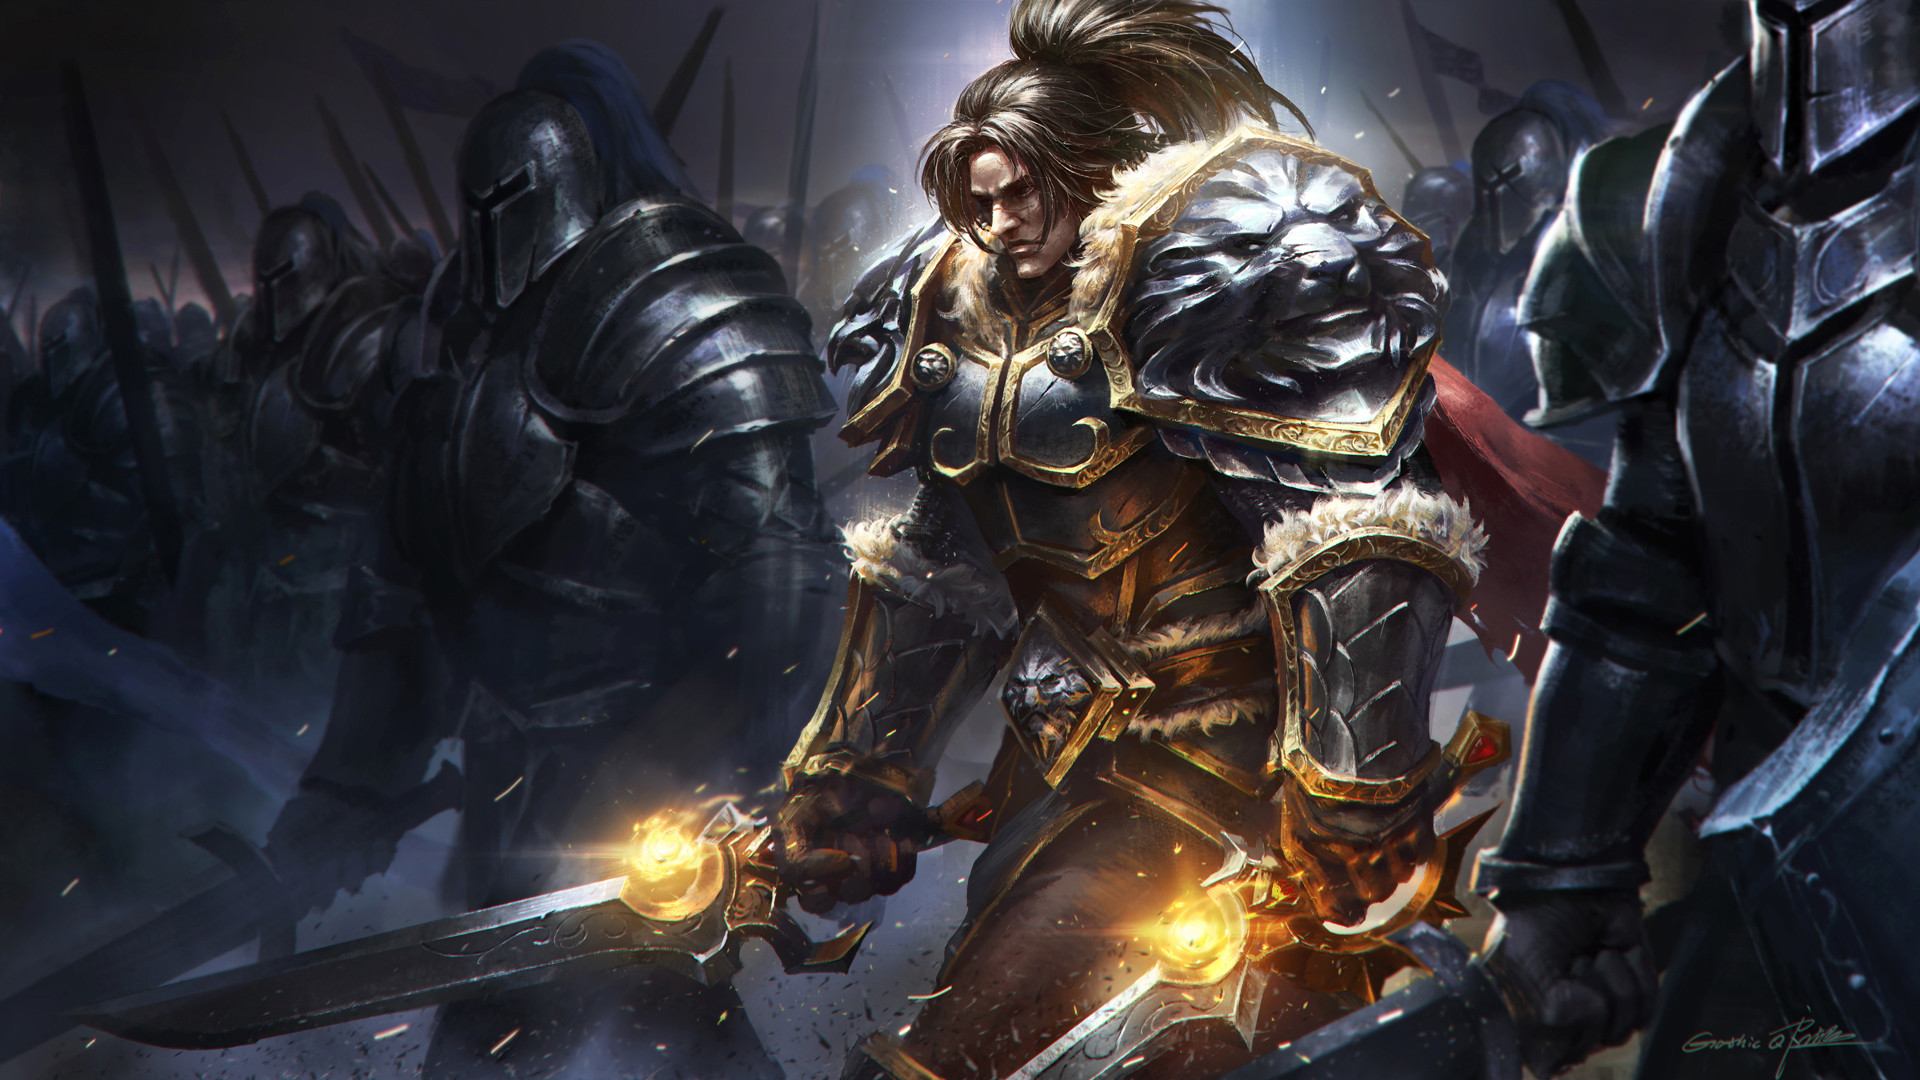 Artwork Blizzard Entertainment Video Games Warcraft World Of Warcraft King Varian Wrynn Army Armour  1920x1080